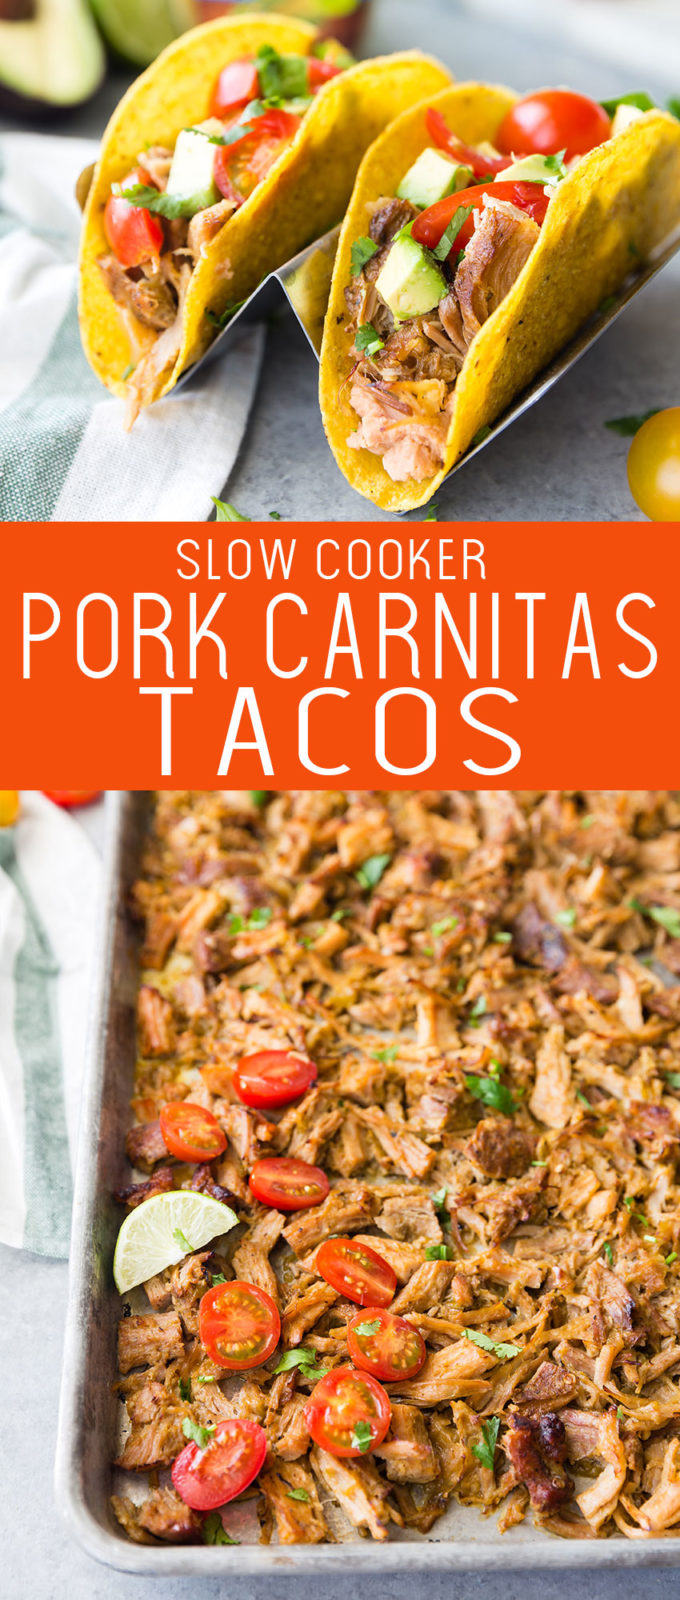 Delicious and easy to make slow cooker pork carnitas tacos. Perfectly seasoned carnitas layered in a hard shell to make tasty tacos. 